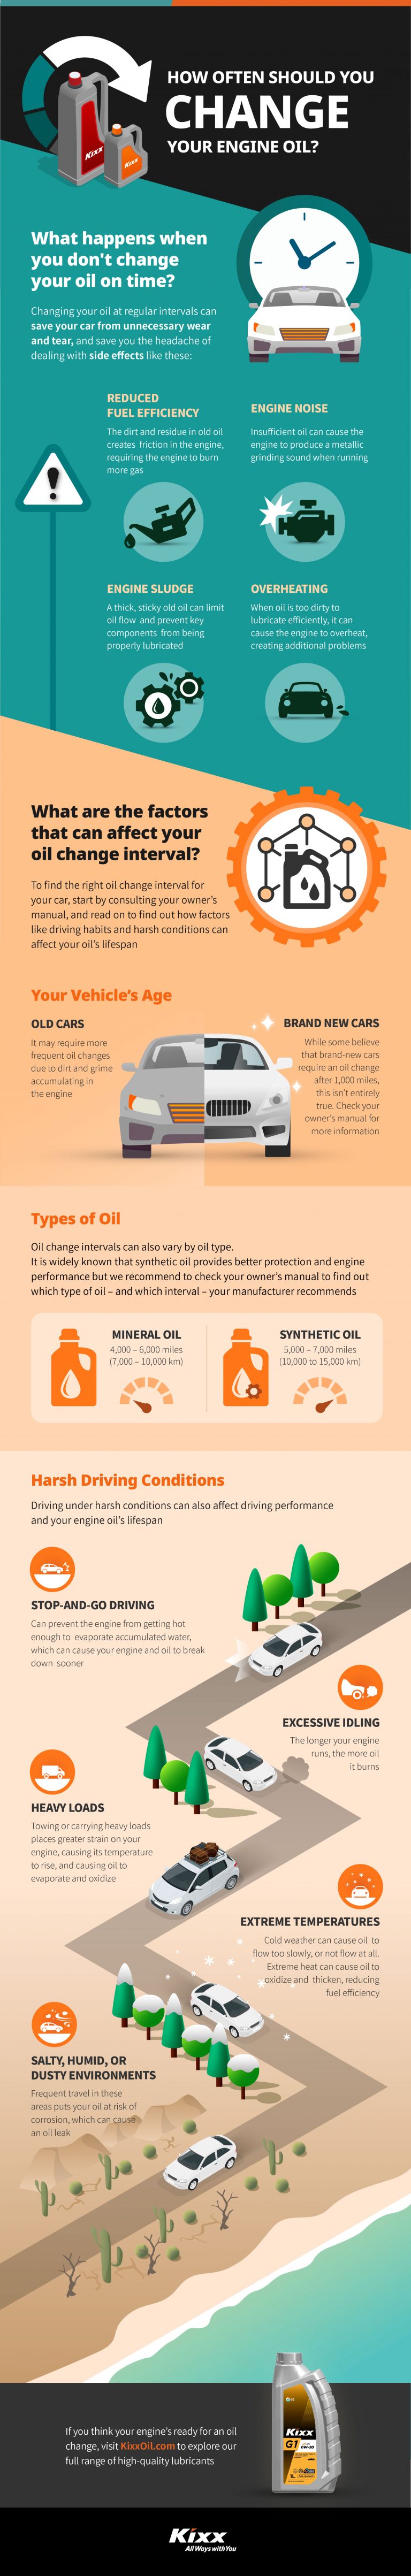 how often to change engine oil